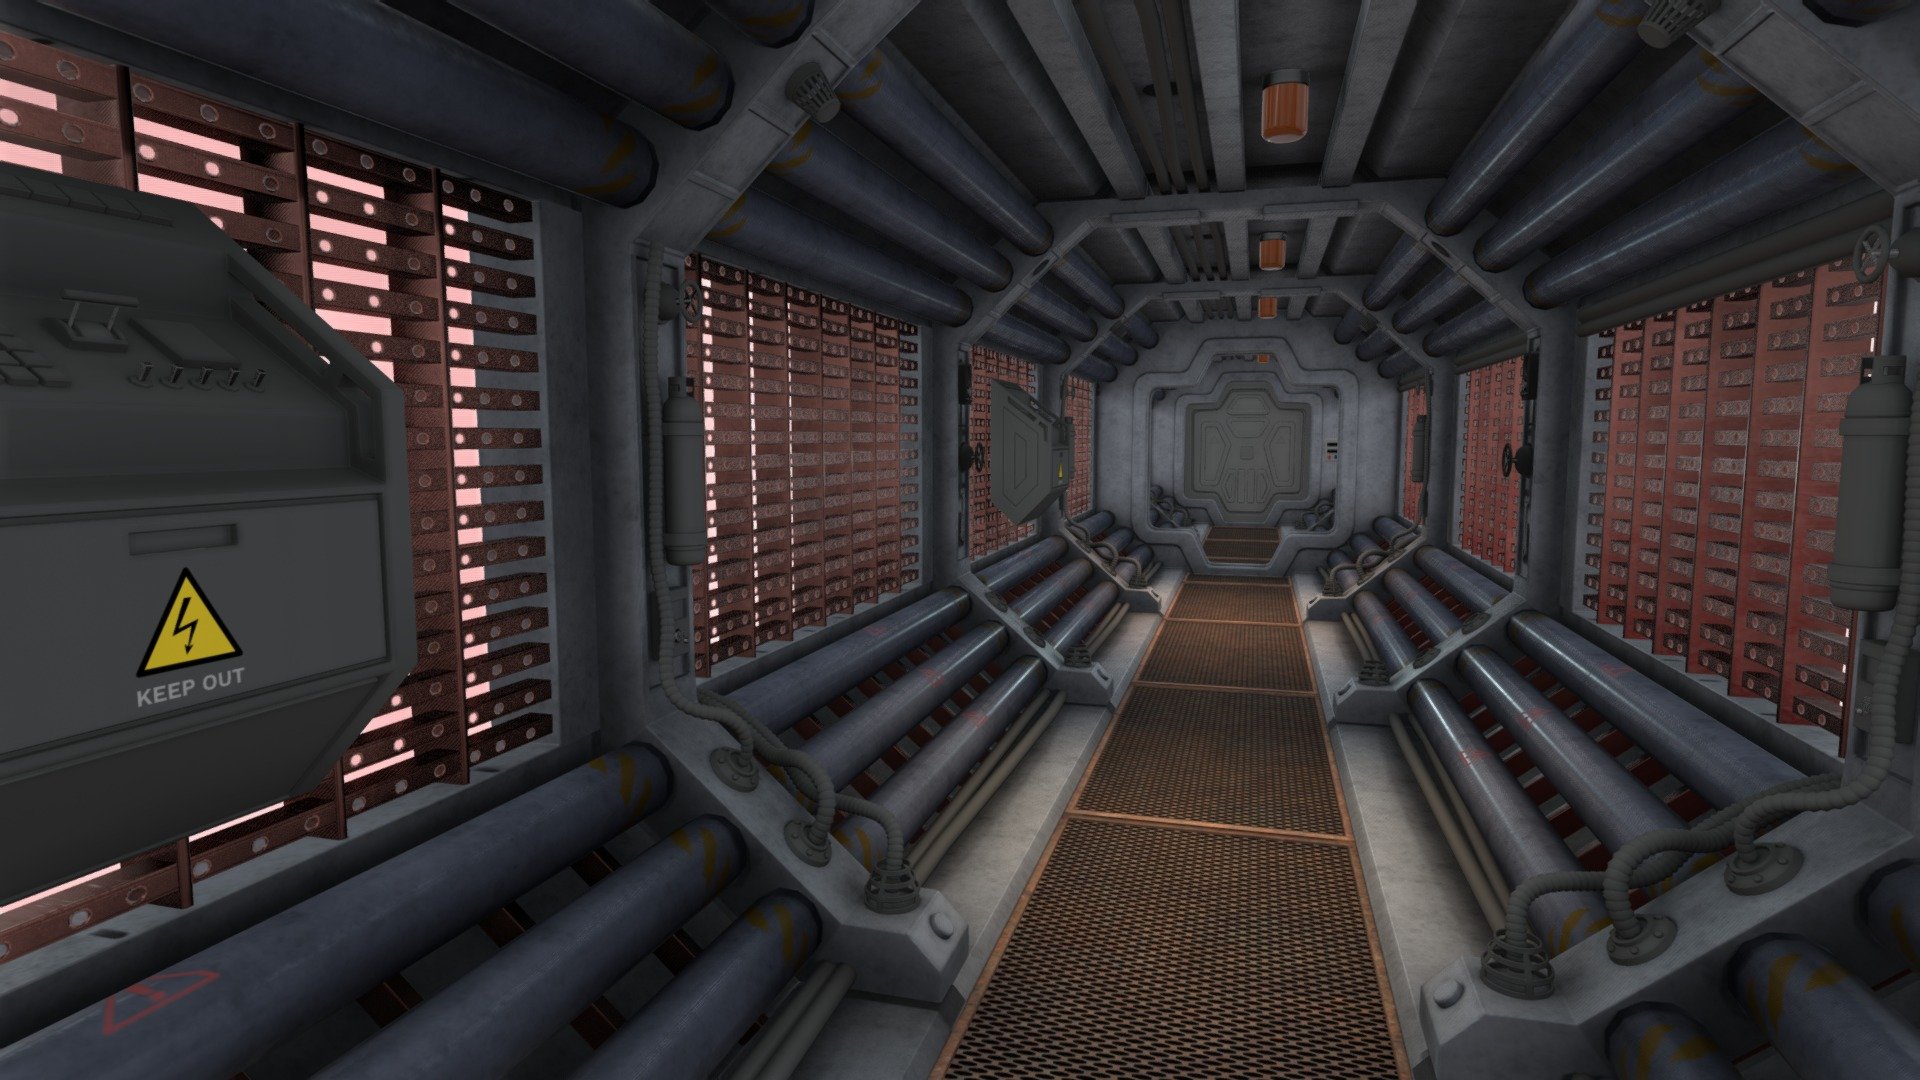 Explore the atmospheric interior of this spaceship hallway, heavily inspired by the iconic design from the film &ldquo;Alien